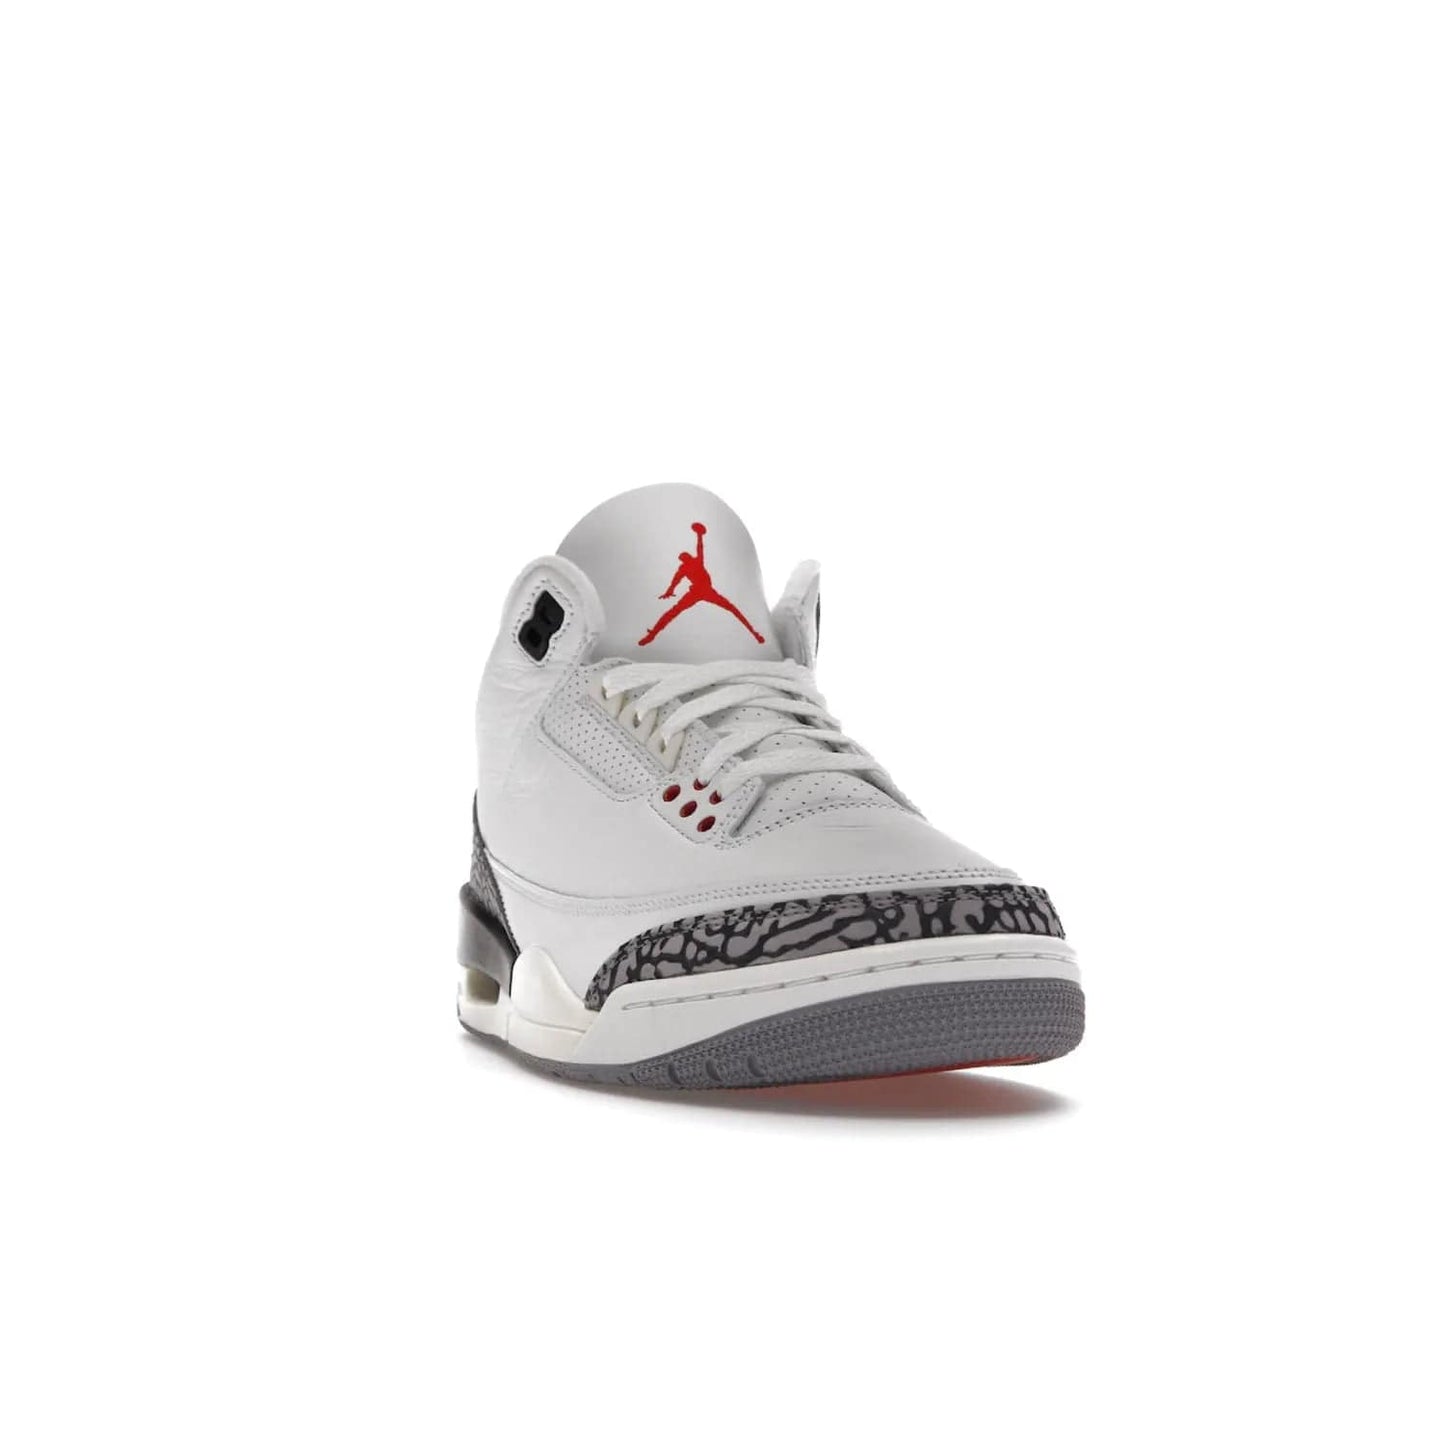 Jordan 3 Retro White Cement Reimagined - Image 8 - Only at www.BallersClubKickz.com - The Reimagined Air Jordan 3 Retro in a Summit White/Fire Red/Black/Cement Grey colorway is launching on March 11, 2023. Featuring a white leather upper, off-white midsoles and heel tabs, this vintage-look sneaker is a must-have.